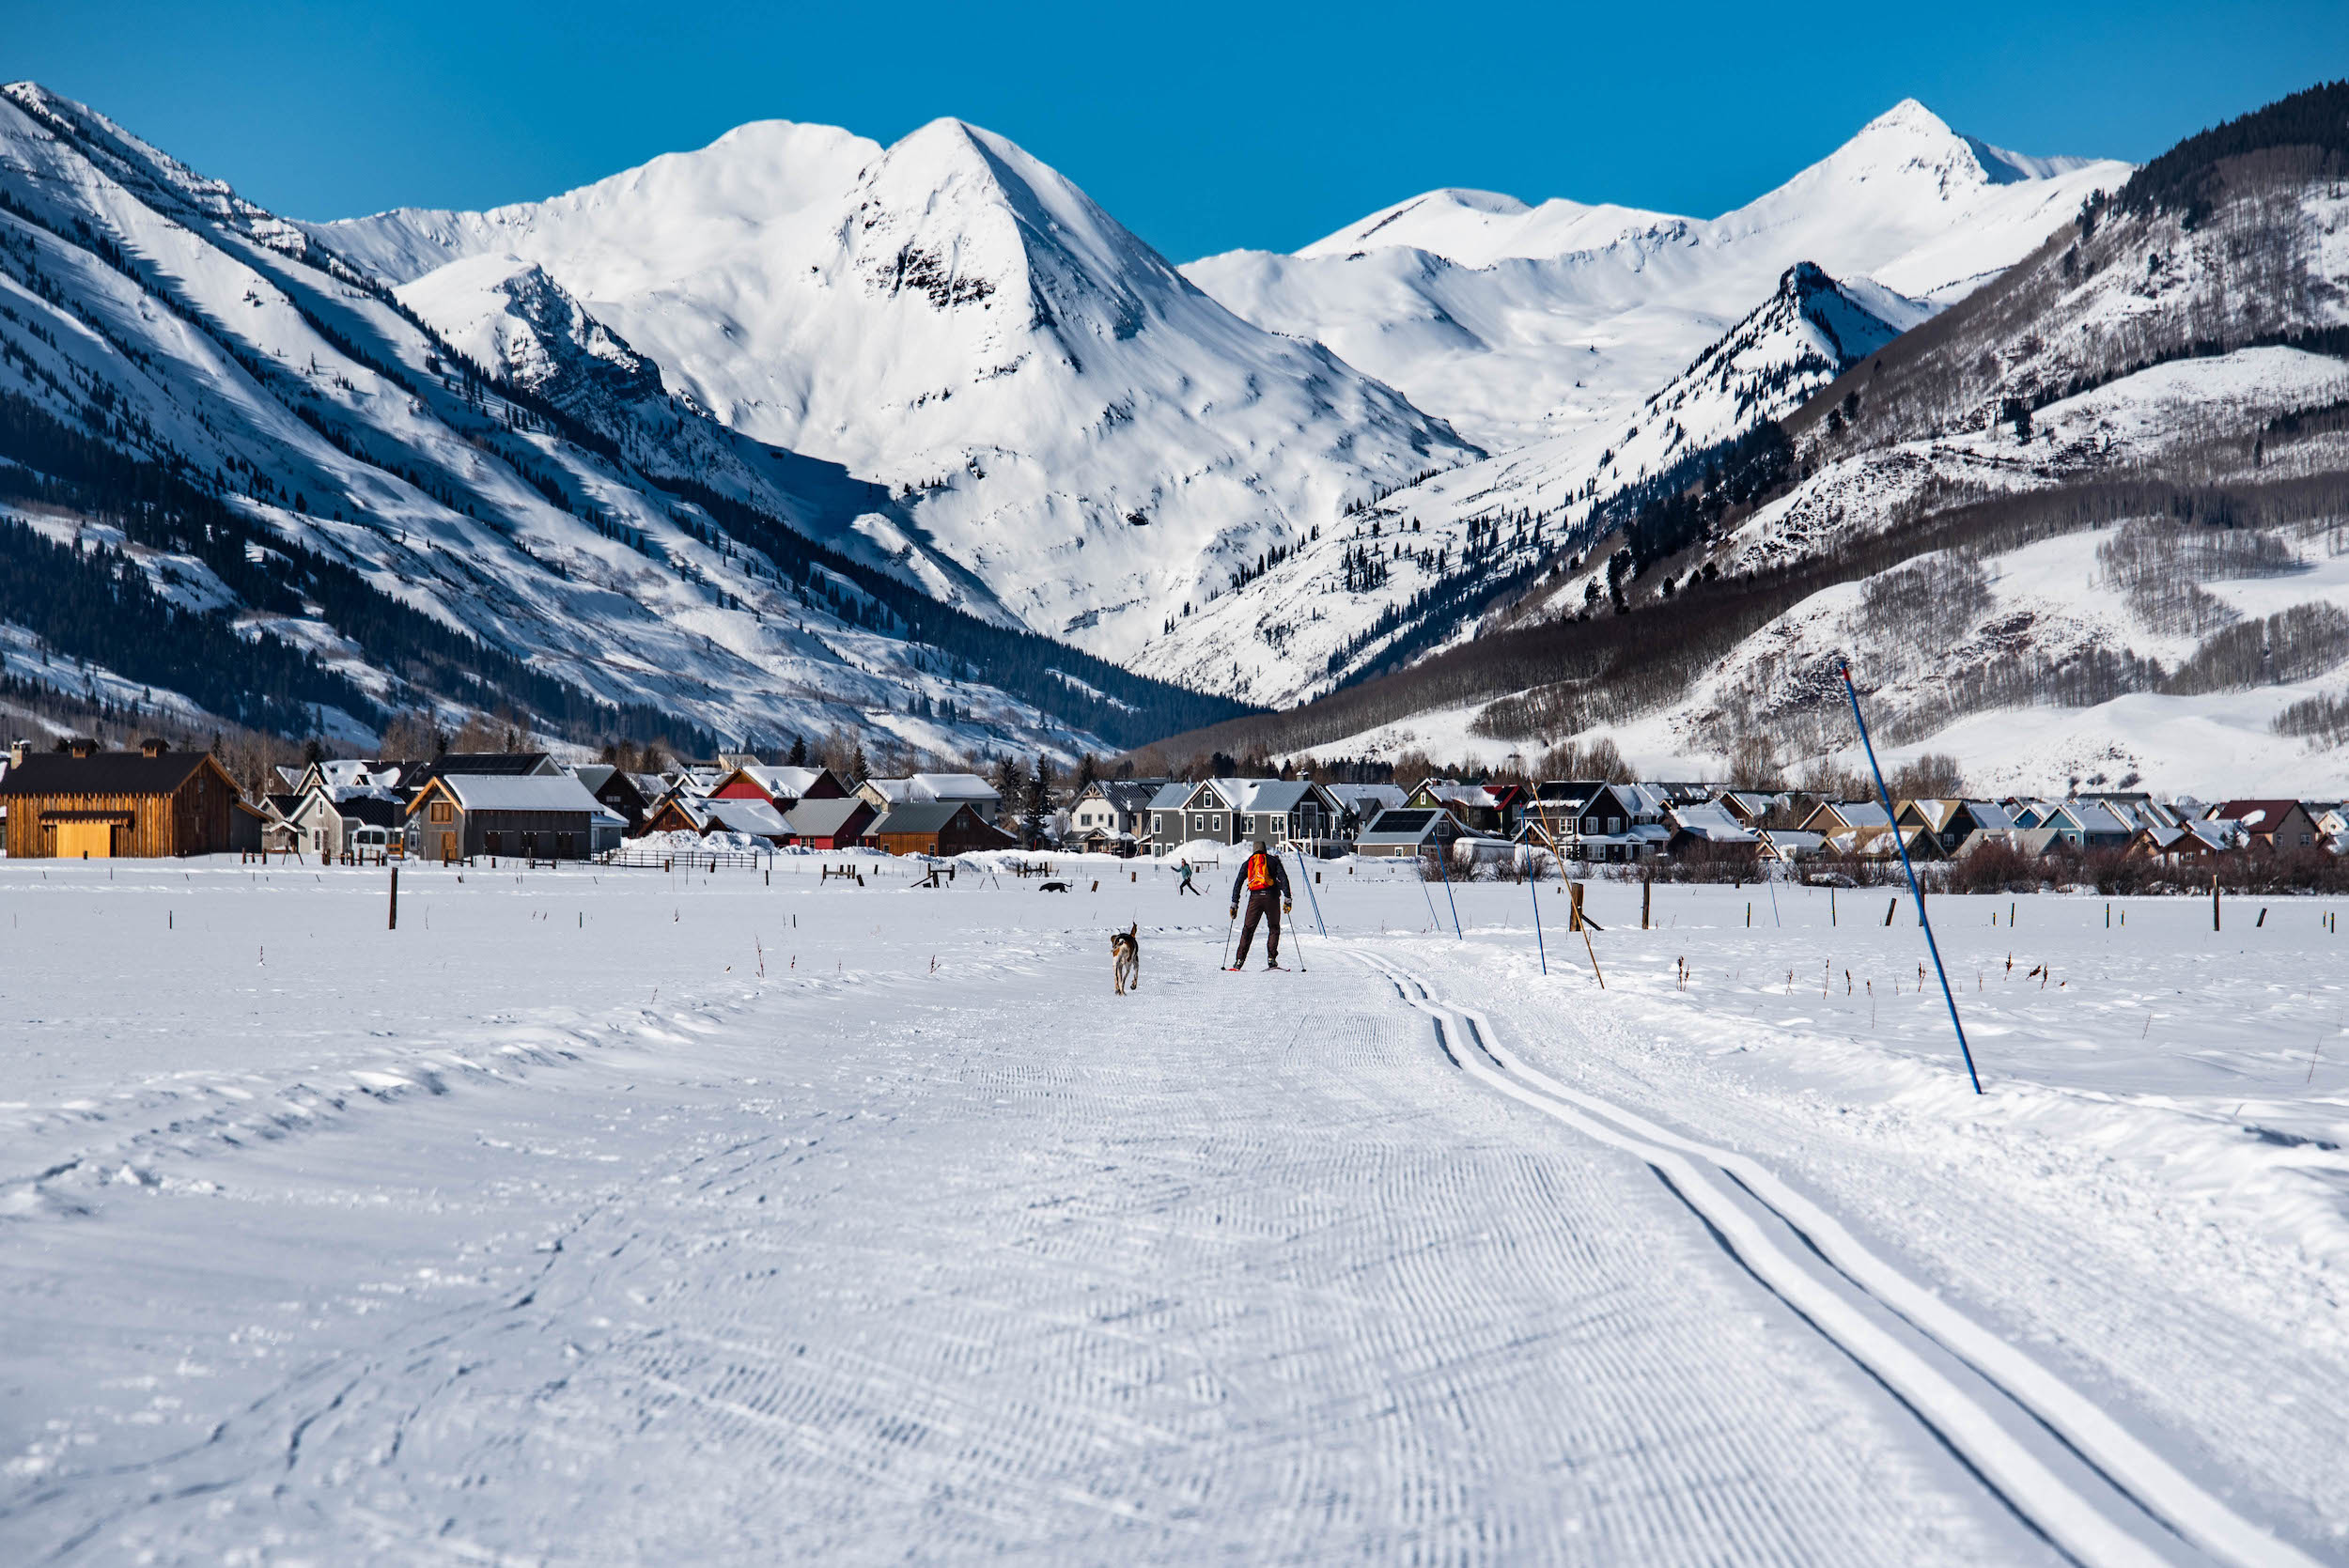 A person and a dog skiing on a Nordic track. This is one of the Crested Butte Nordic skiing areas 